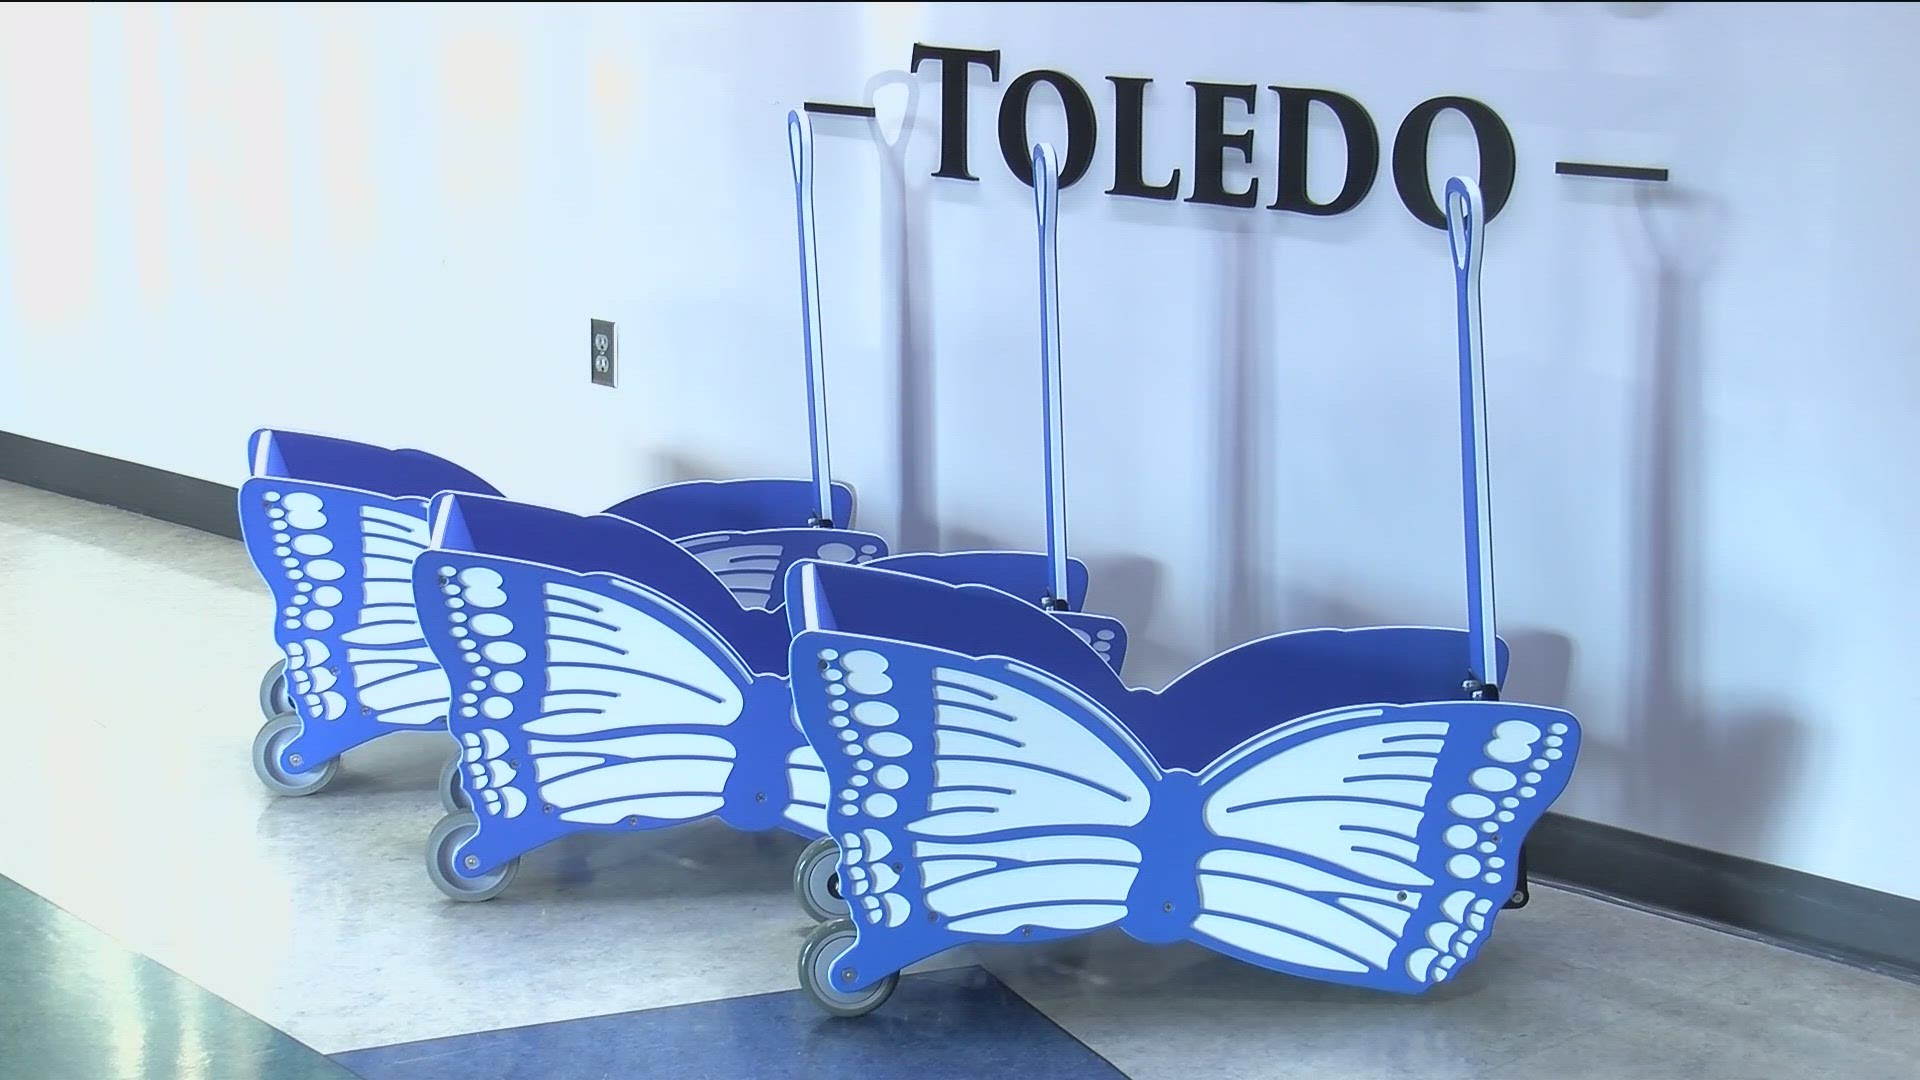 Hospital visits can be stressful, especially for kids. Nationwide Children's Hospital-Toledo is working to ease visits with Butterfly Wagons.